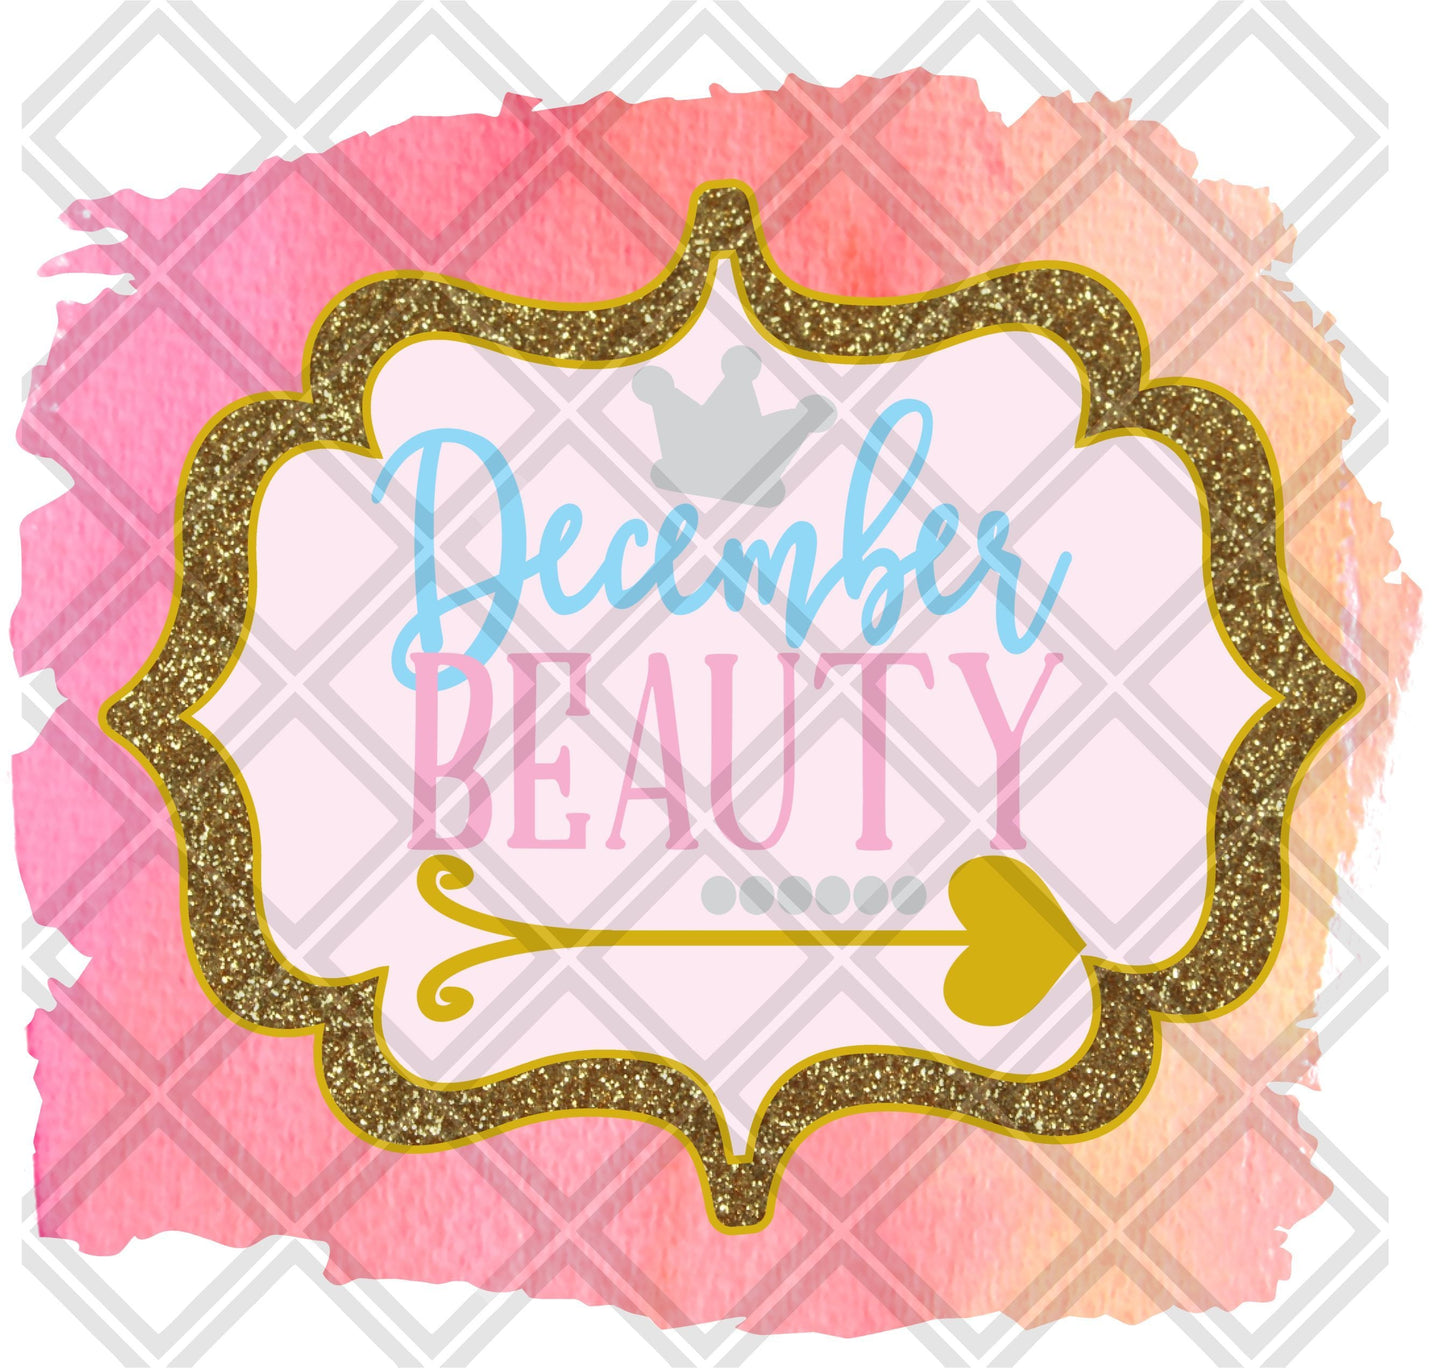 December Beauty Month DTF TRANSFERPRINT TO ORDER